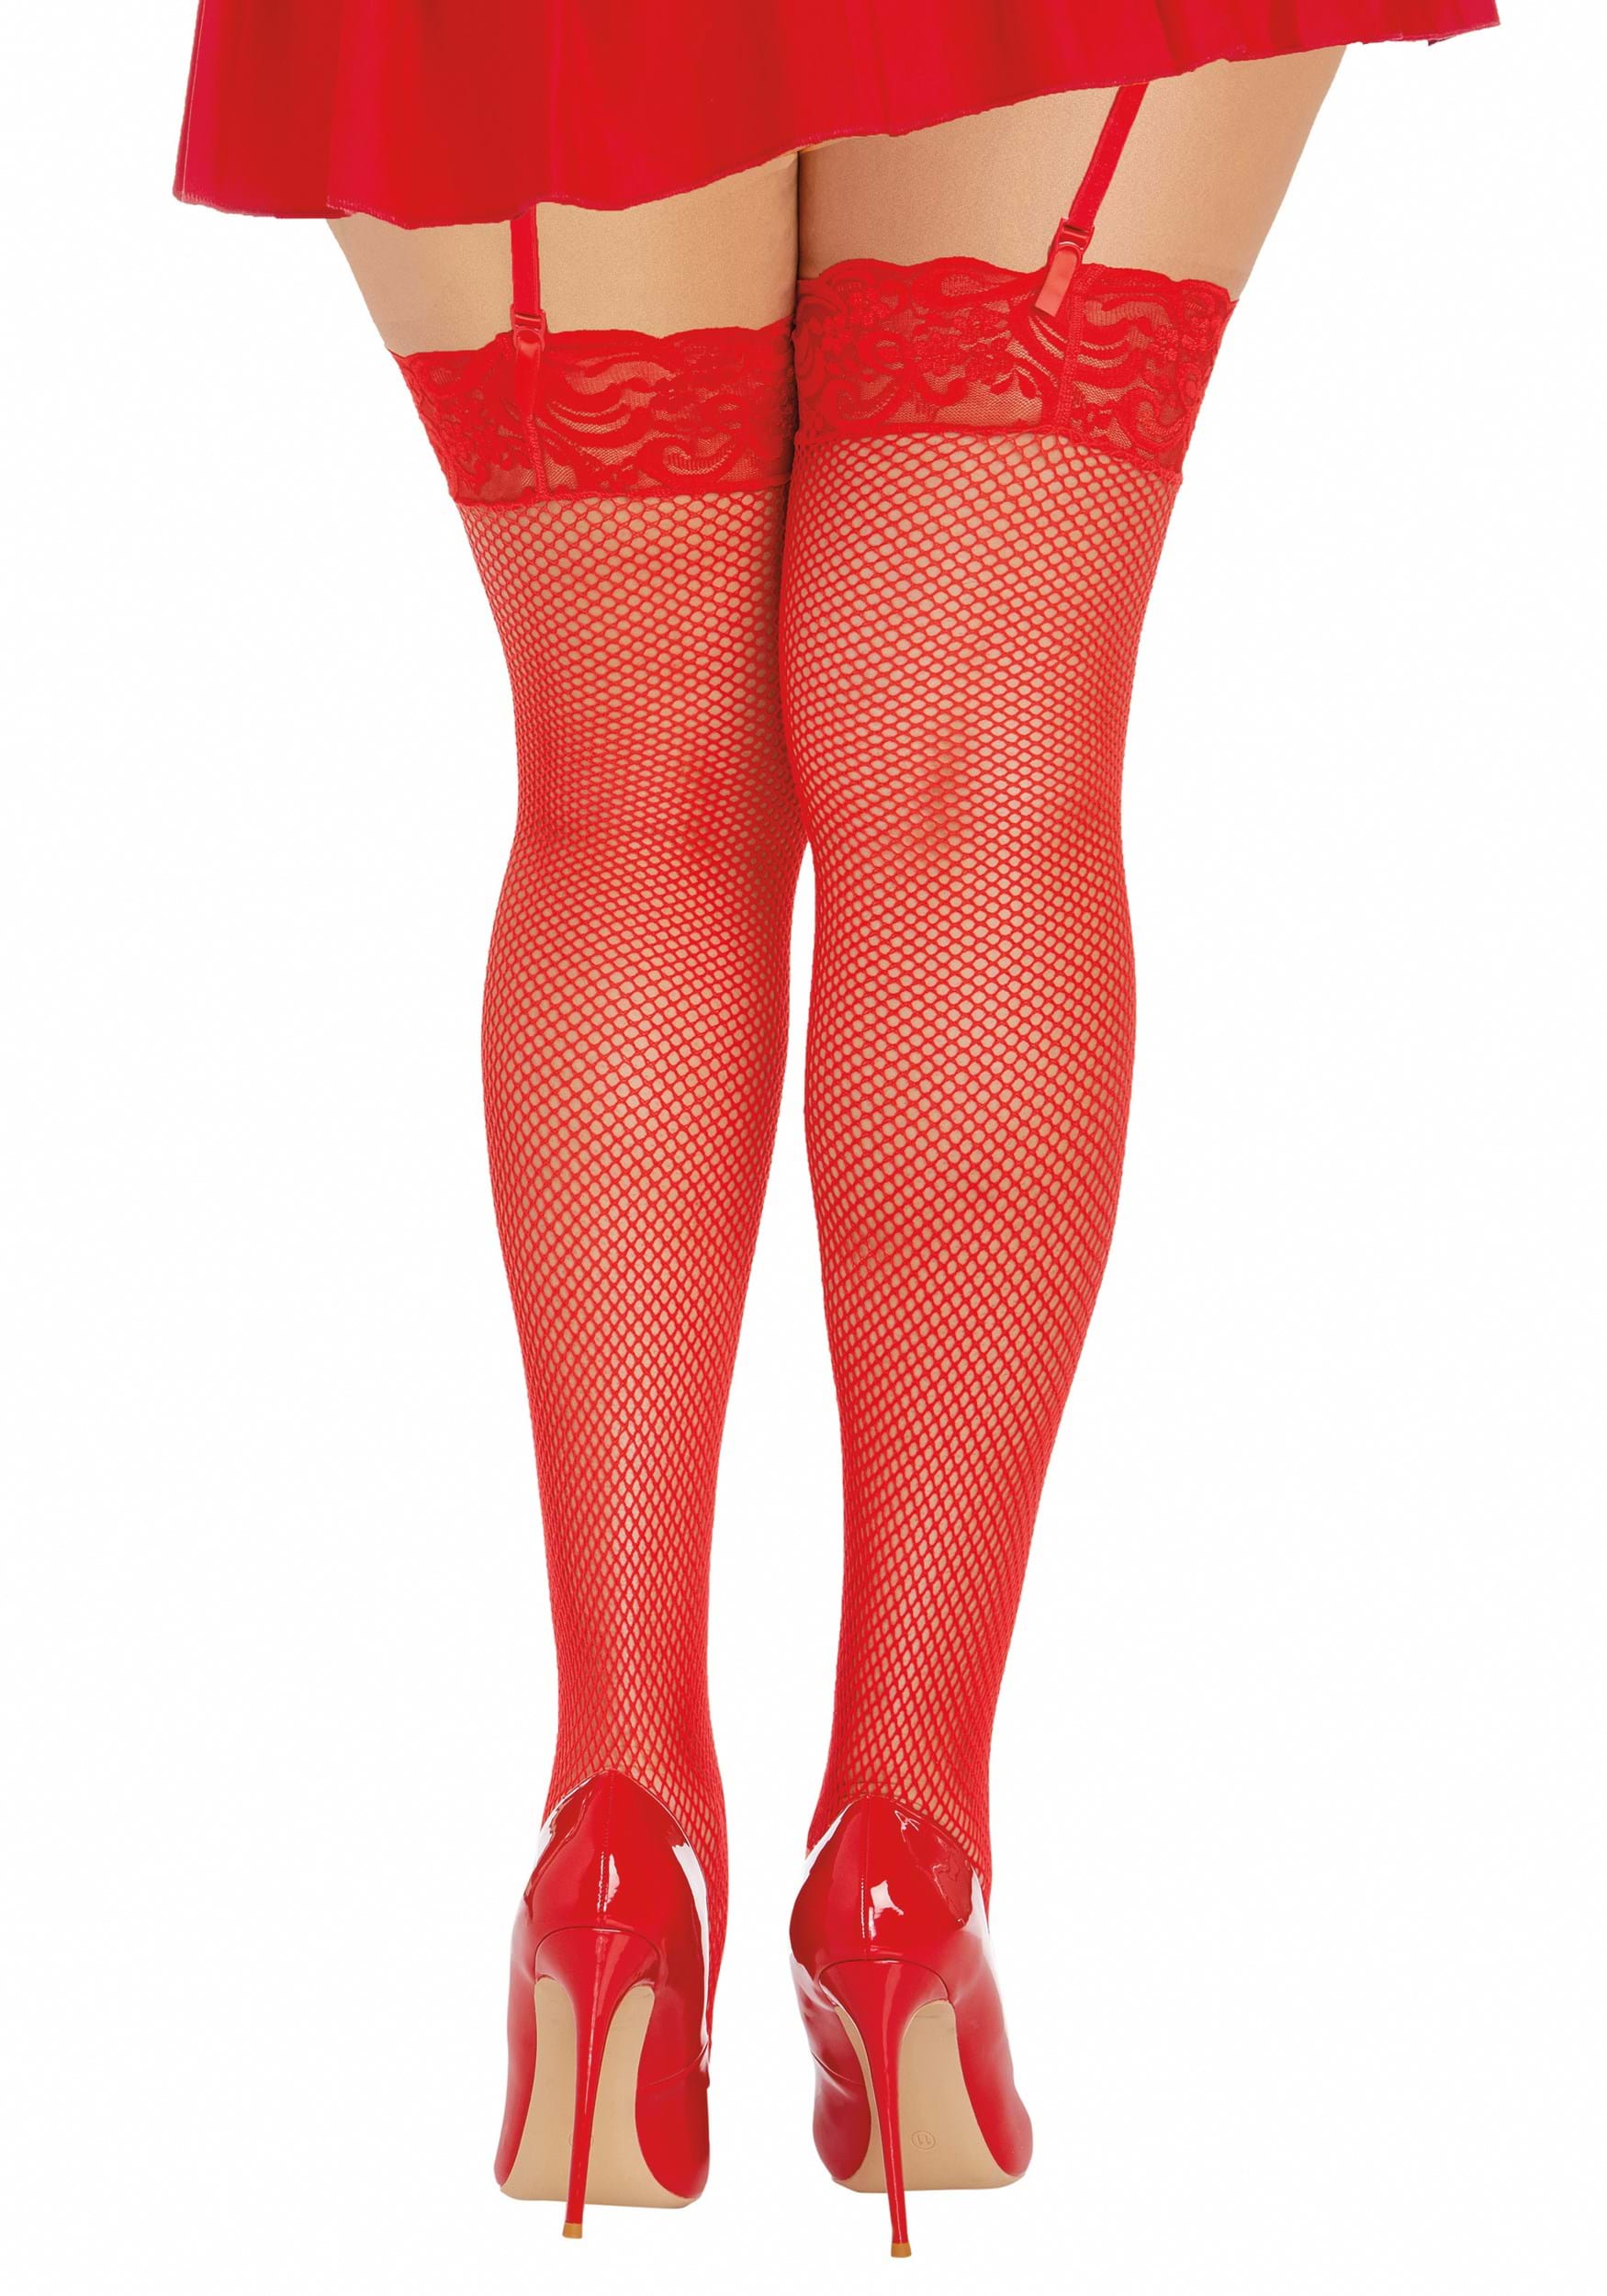 Plus Size Red Women's Thigh High Fishnet Stockings with Lace Top